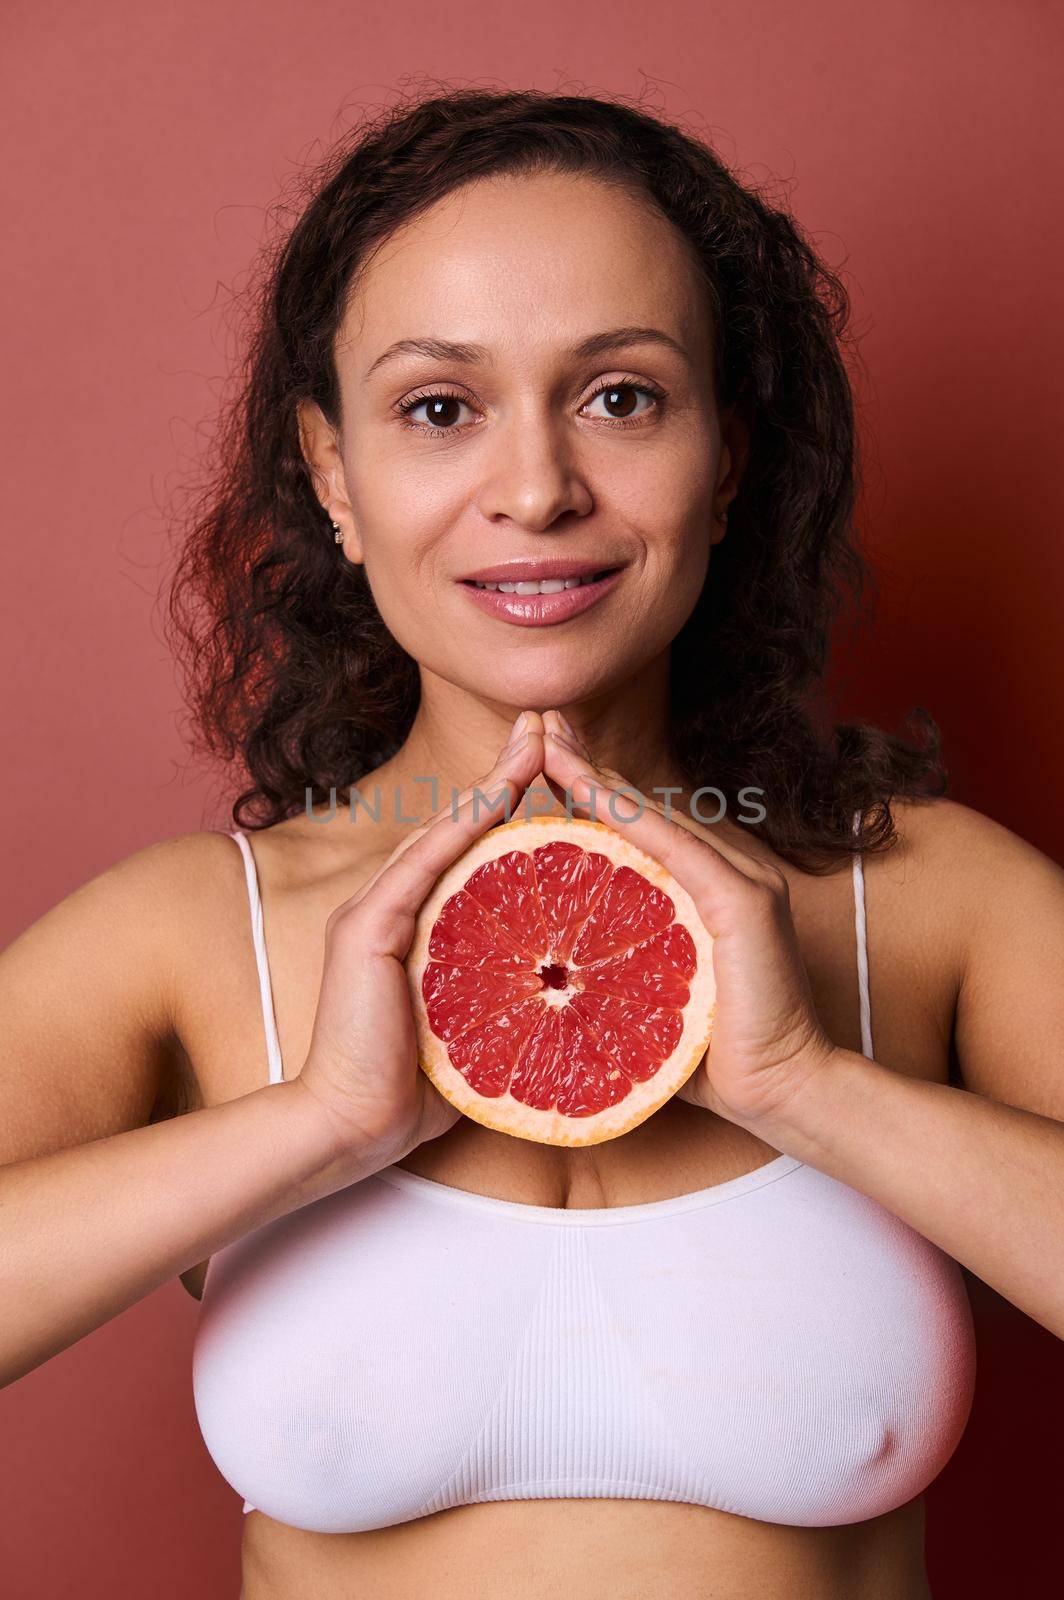 Beauty portrait of an attractive smiling middle aged beautiful woman with curly dark hair hair, wearing white underwear, isolated on bright coral background, holding half of fresh juicy red grapefruit by artgf